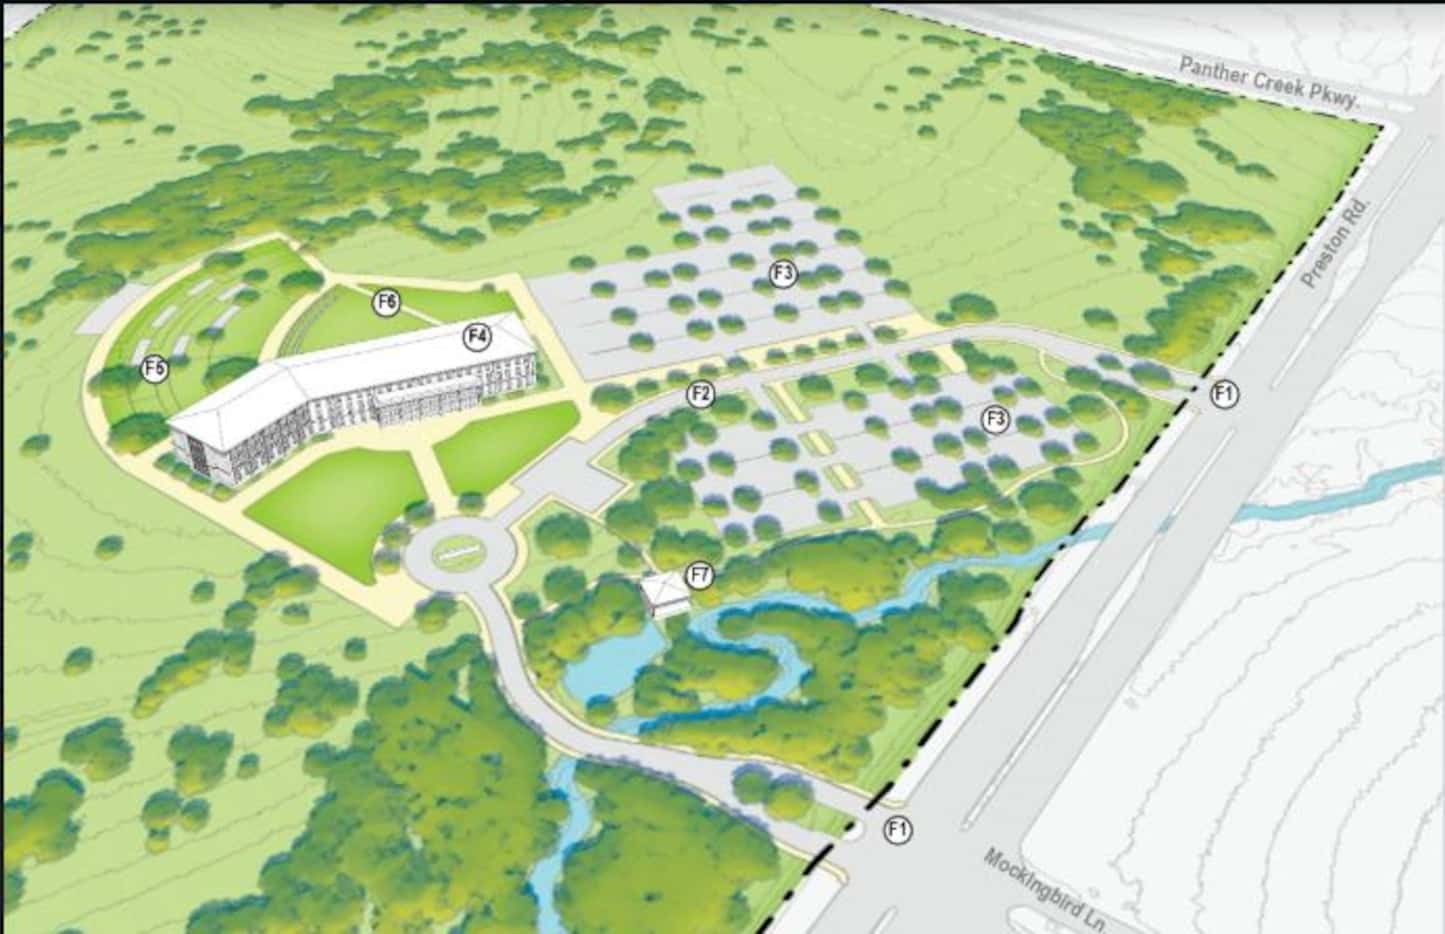 The University of North Texas officials revealed the first look of a new campus in Frisco.